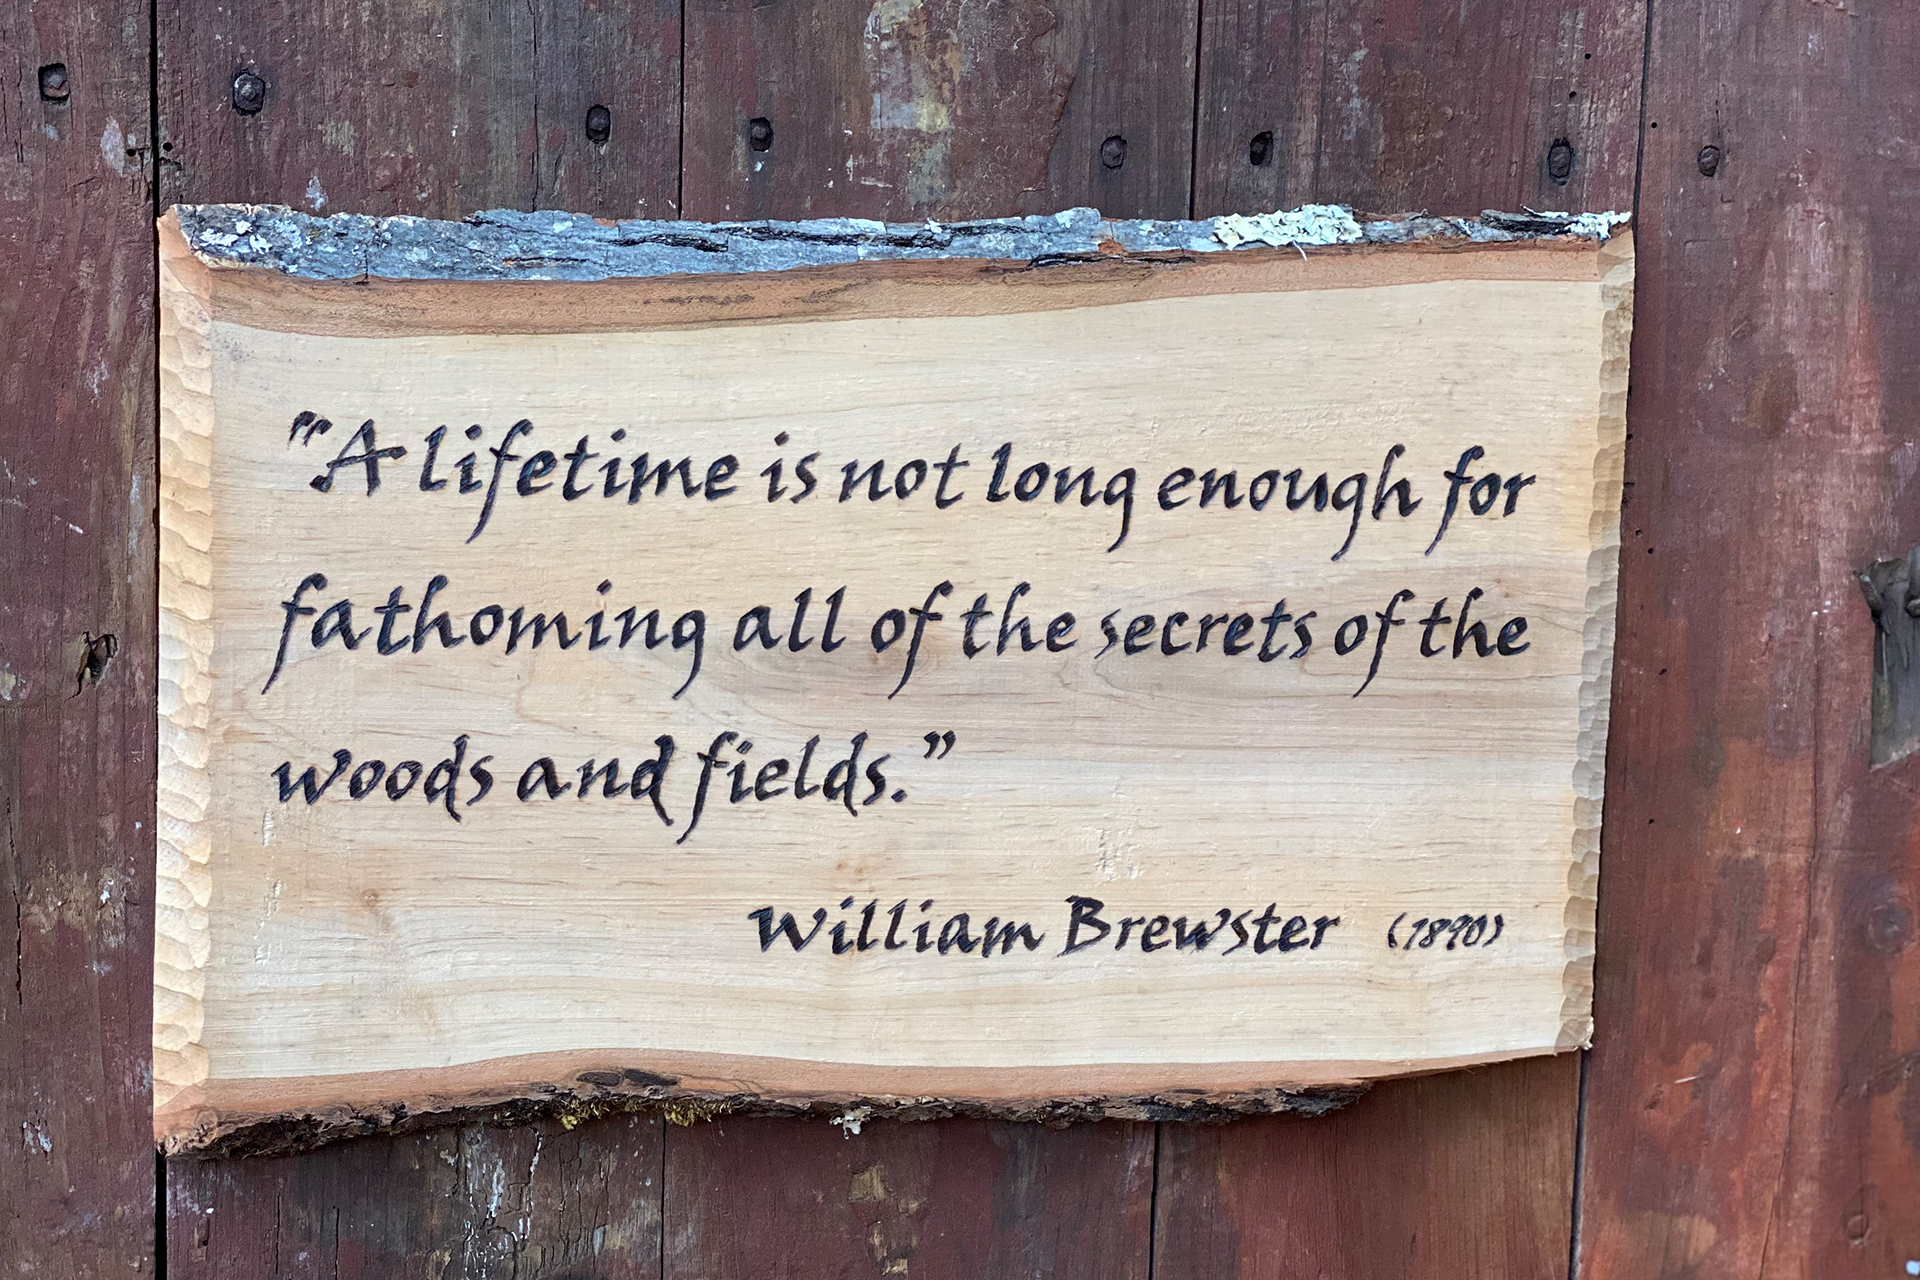 A wooden plaque reading "A lifetime is not long enough for fathoming all of the secrets of the woods and fields.", William Brewster (1880)